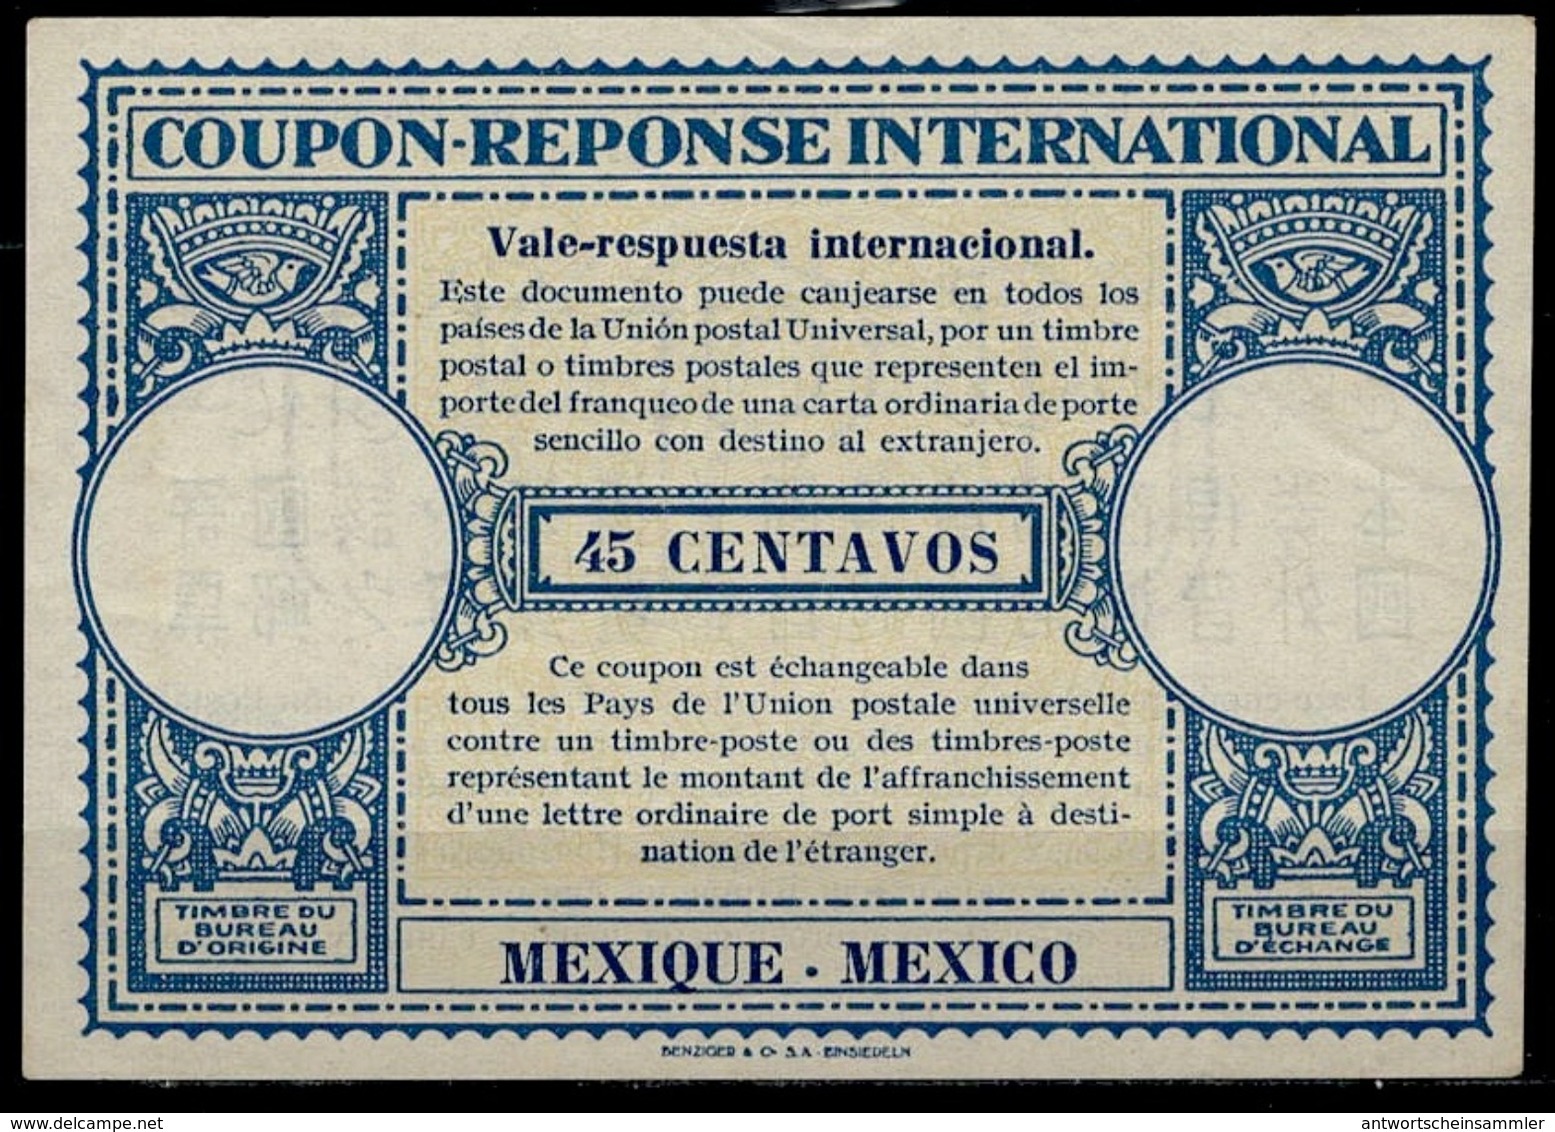 MEXICO / MEXIQUE Ca 1948, London Type XVr 45 CENTAVOS International Reply Coupon Reponse Antwortschein IAS IRC Mint ** - Mexico